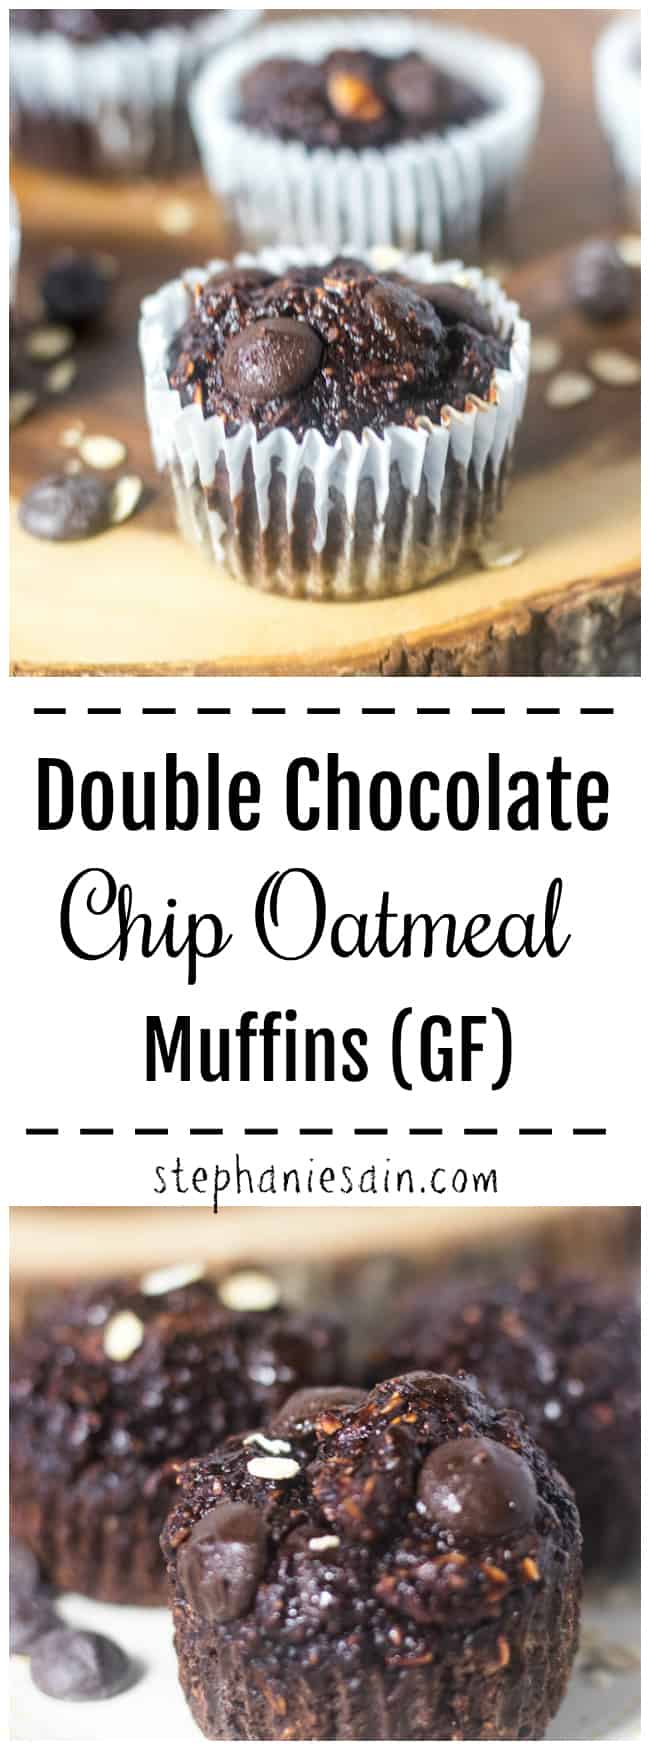 These Chocolate Muffins are jam packed with chocolate chips and oatmeal. A healthier muffin made with simple ingredients that's perfect for breakfast, snacking or dessert. Gluten Free and No Added Refined Sugars.